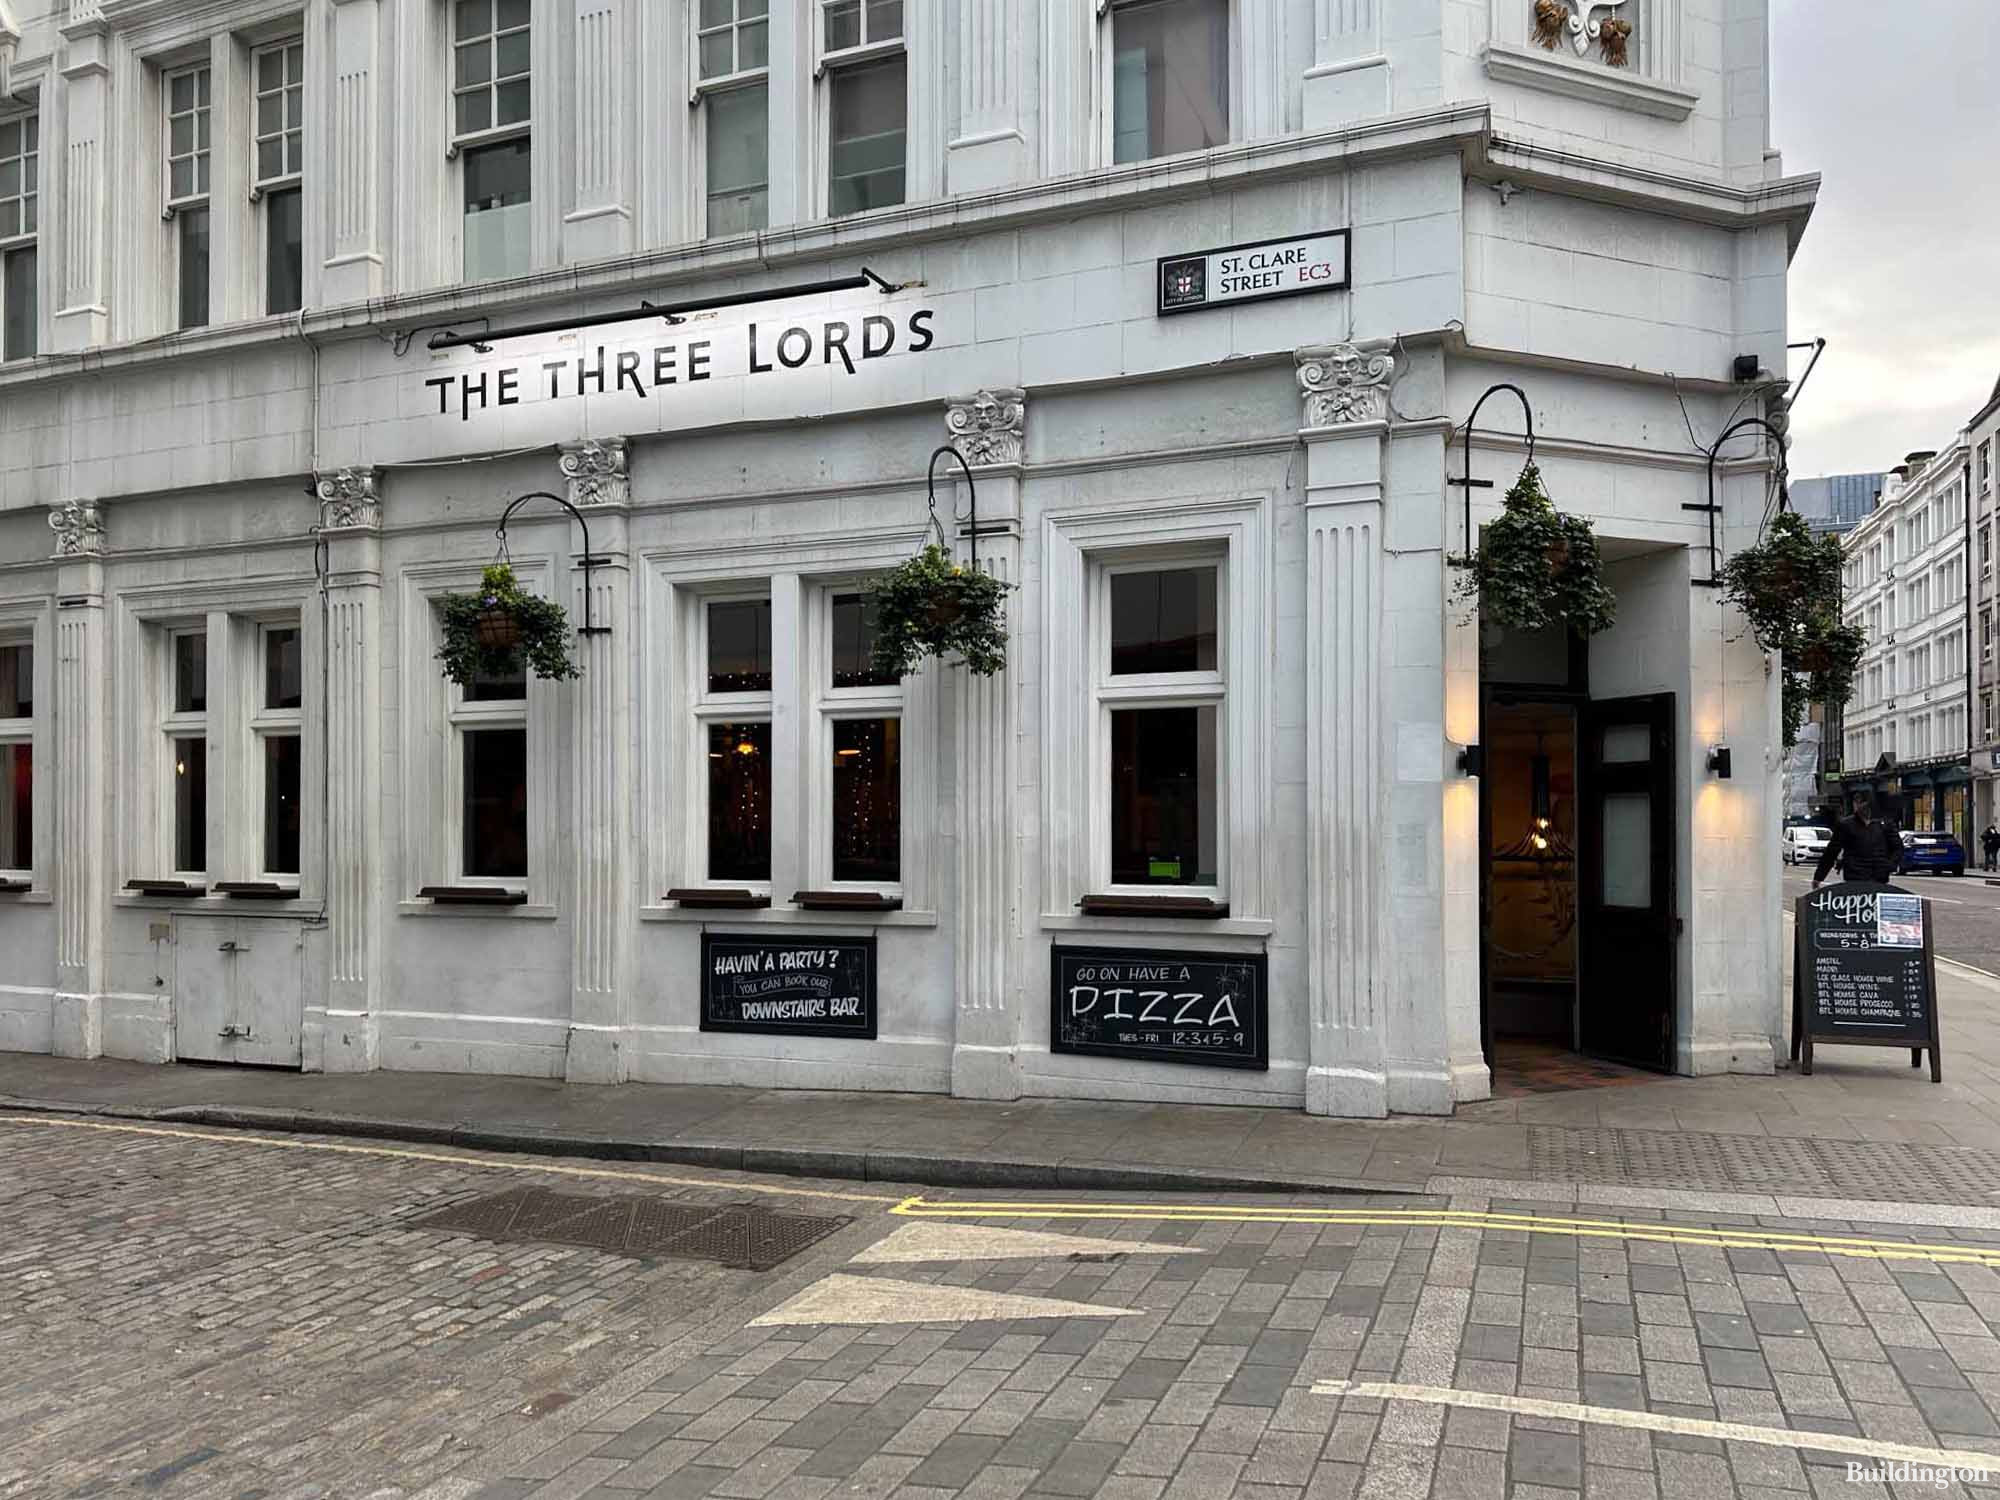 The Three Lords pub on the corner of St Clare Street and the Minories in the City of London EC3. 